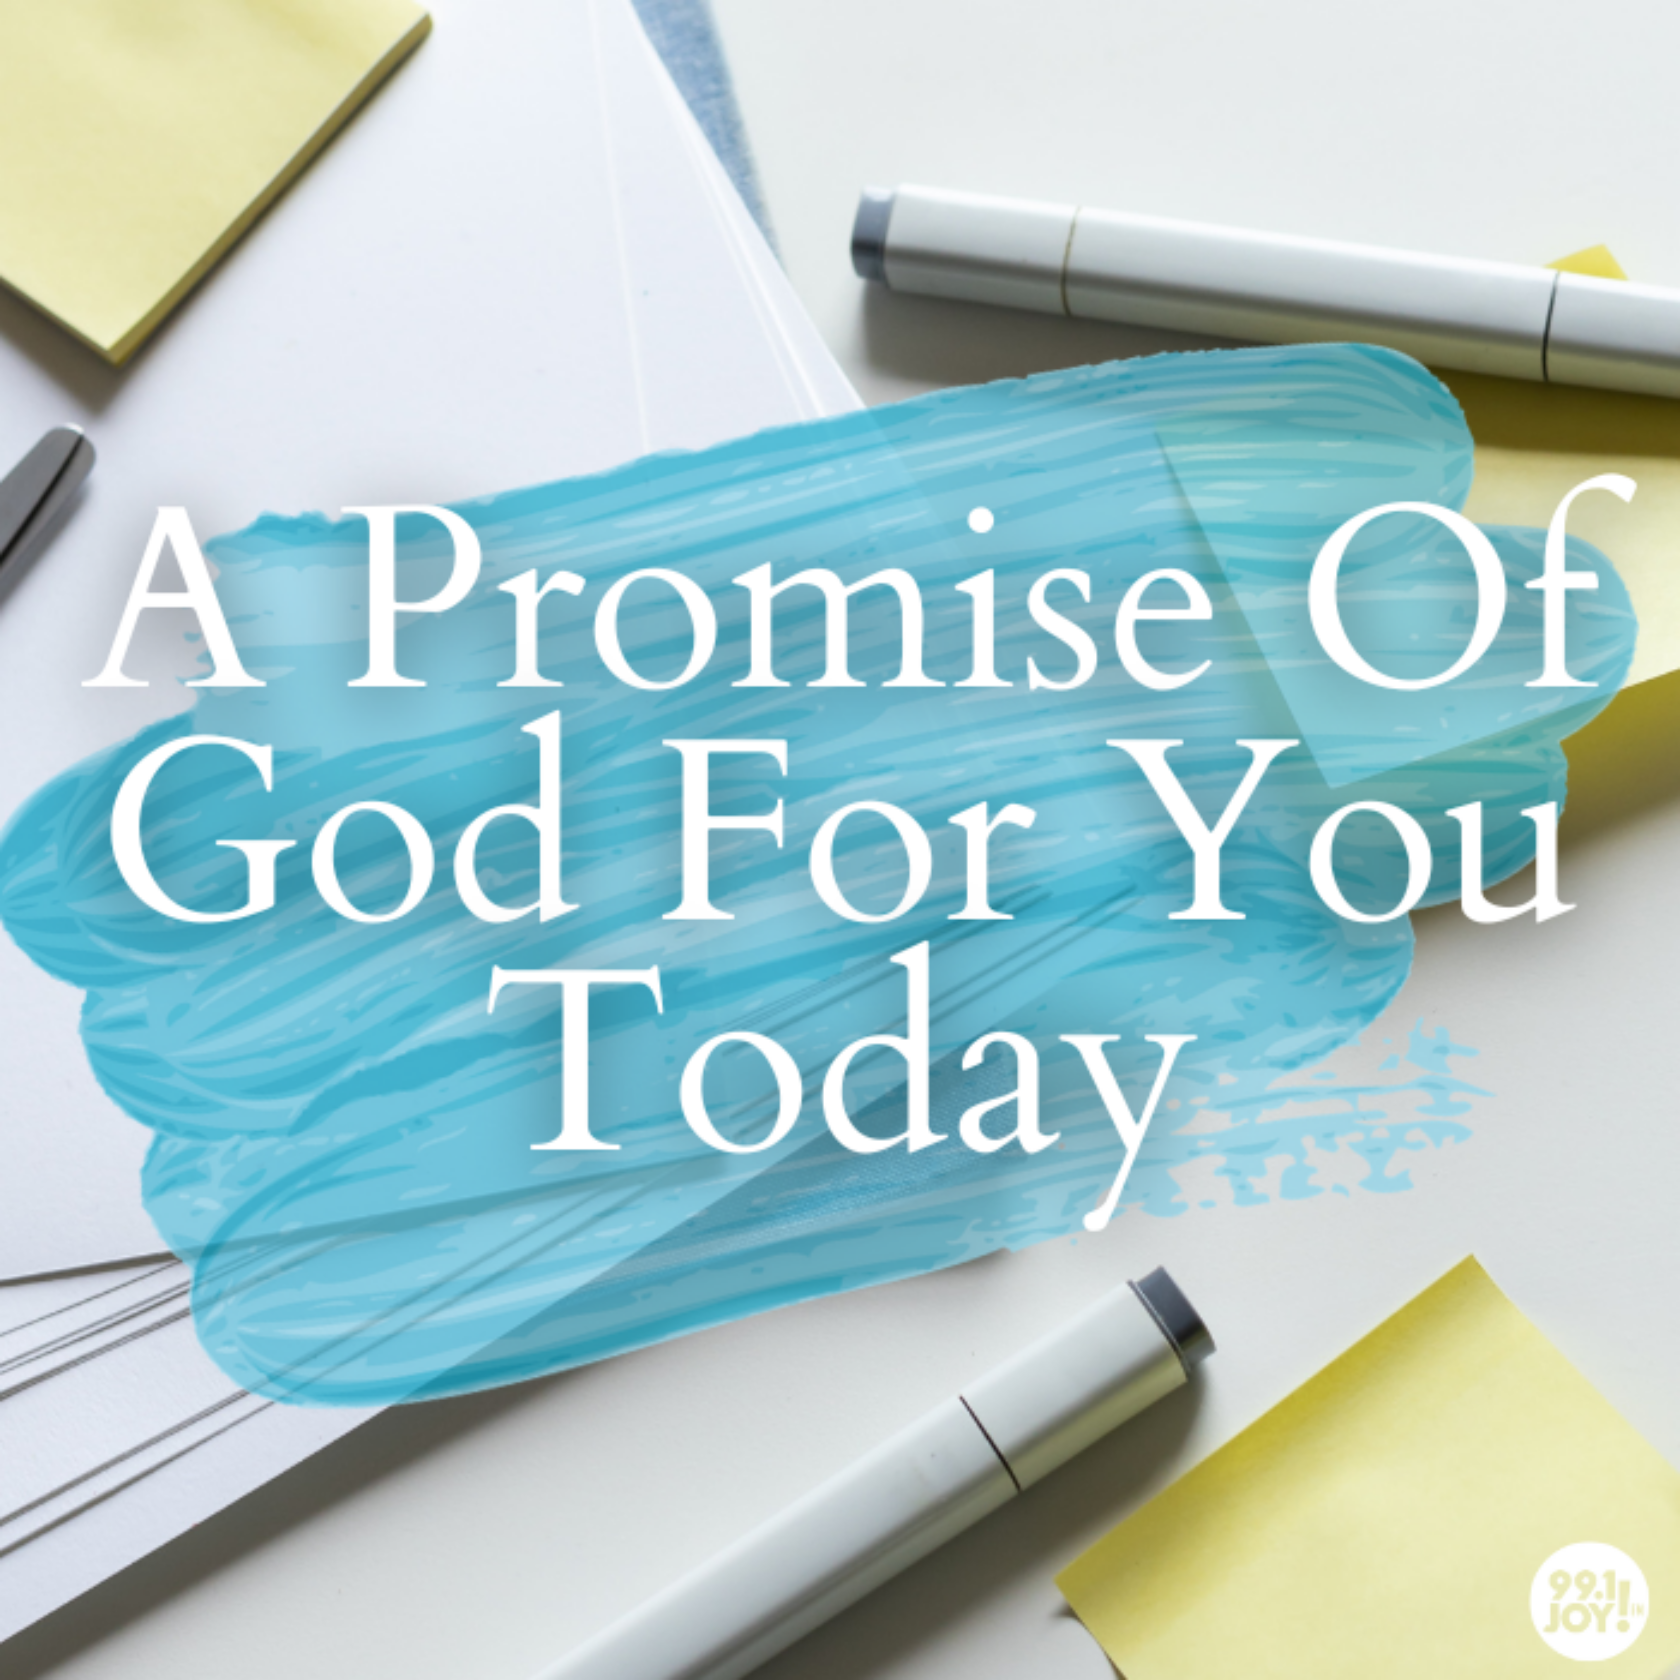 A Promise Of God For You Today